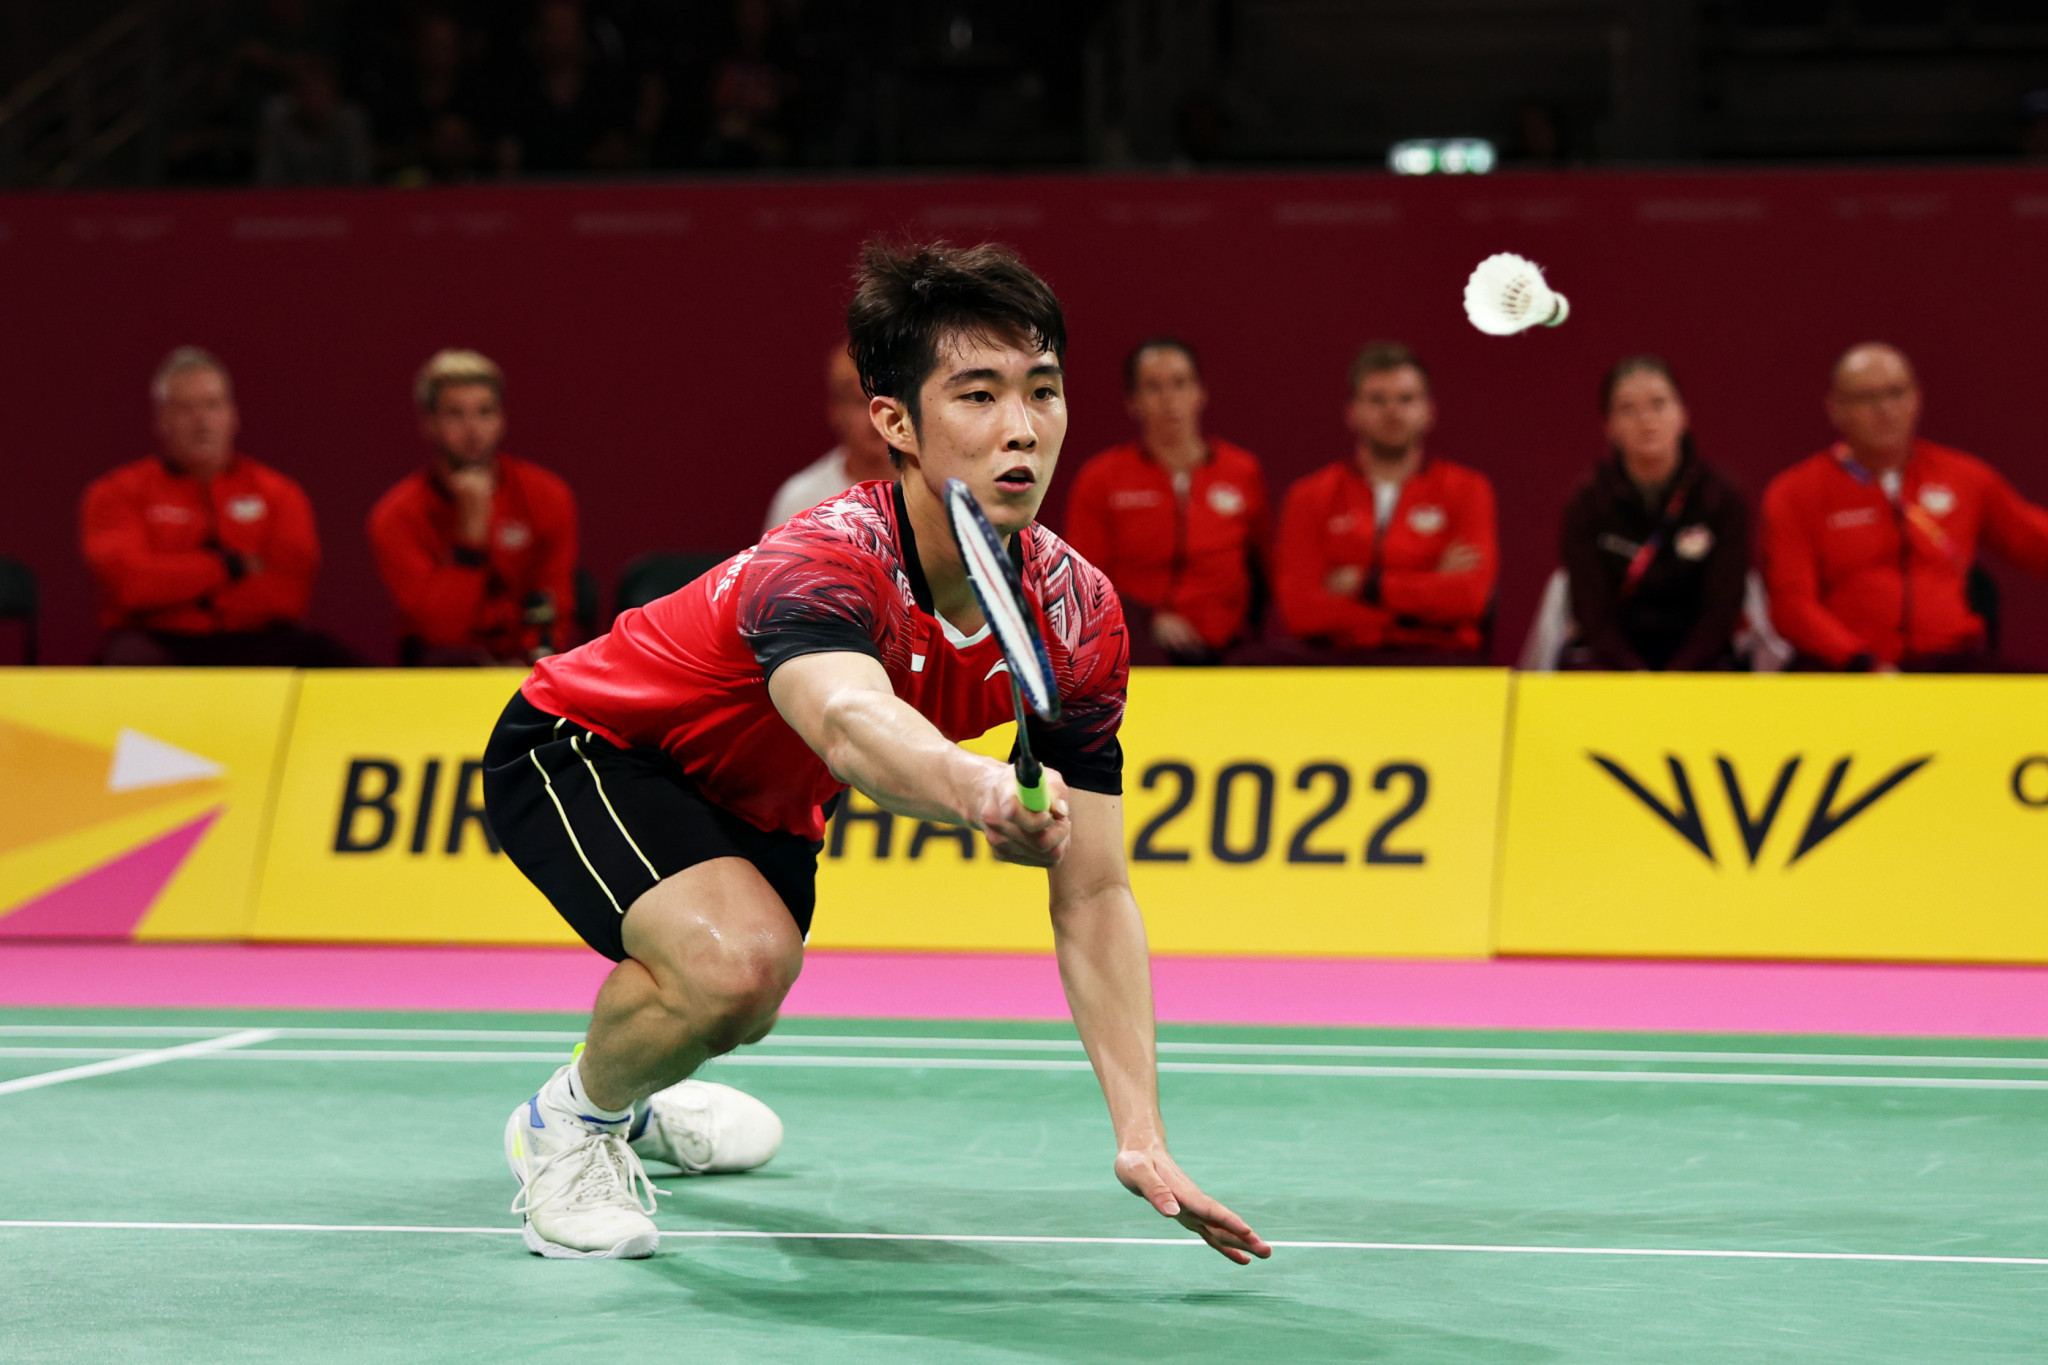 Loh and Sindhu get Birmingham 2022 badminton singles campaigns off to perfect start